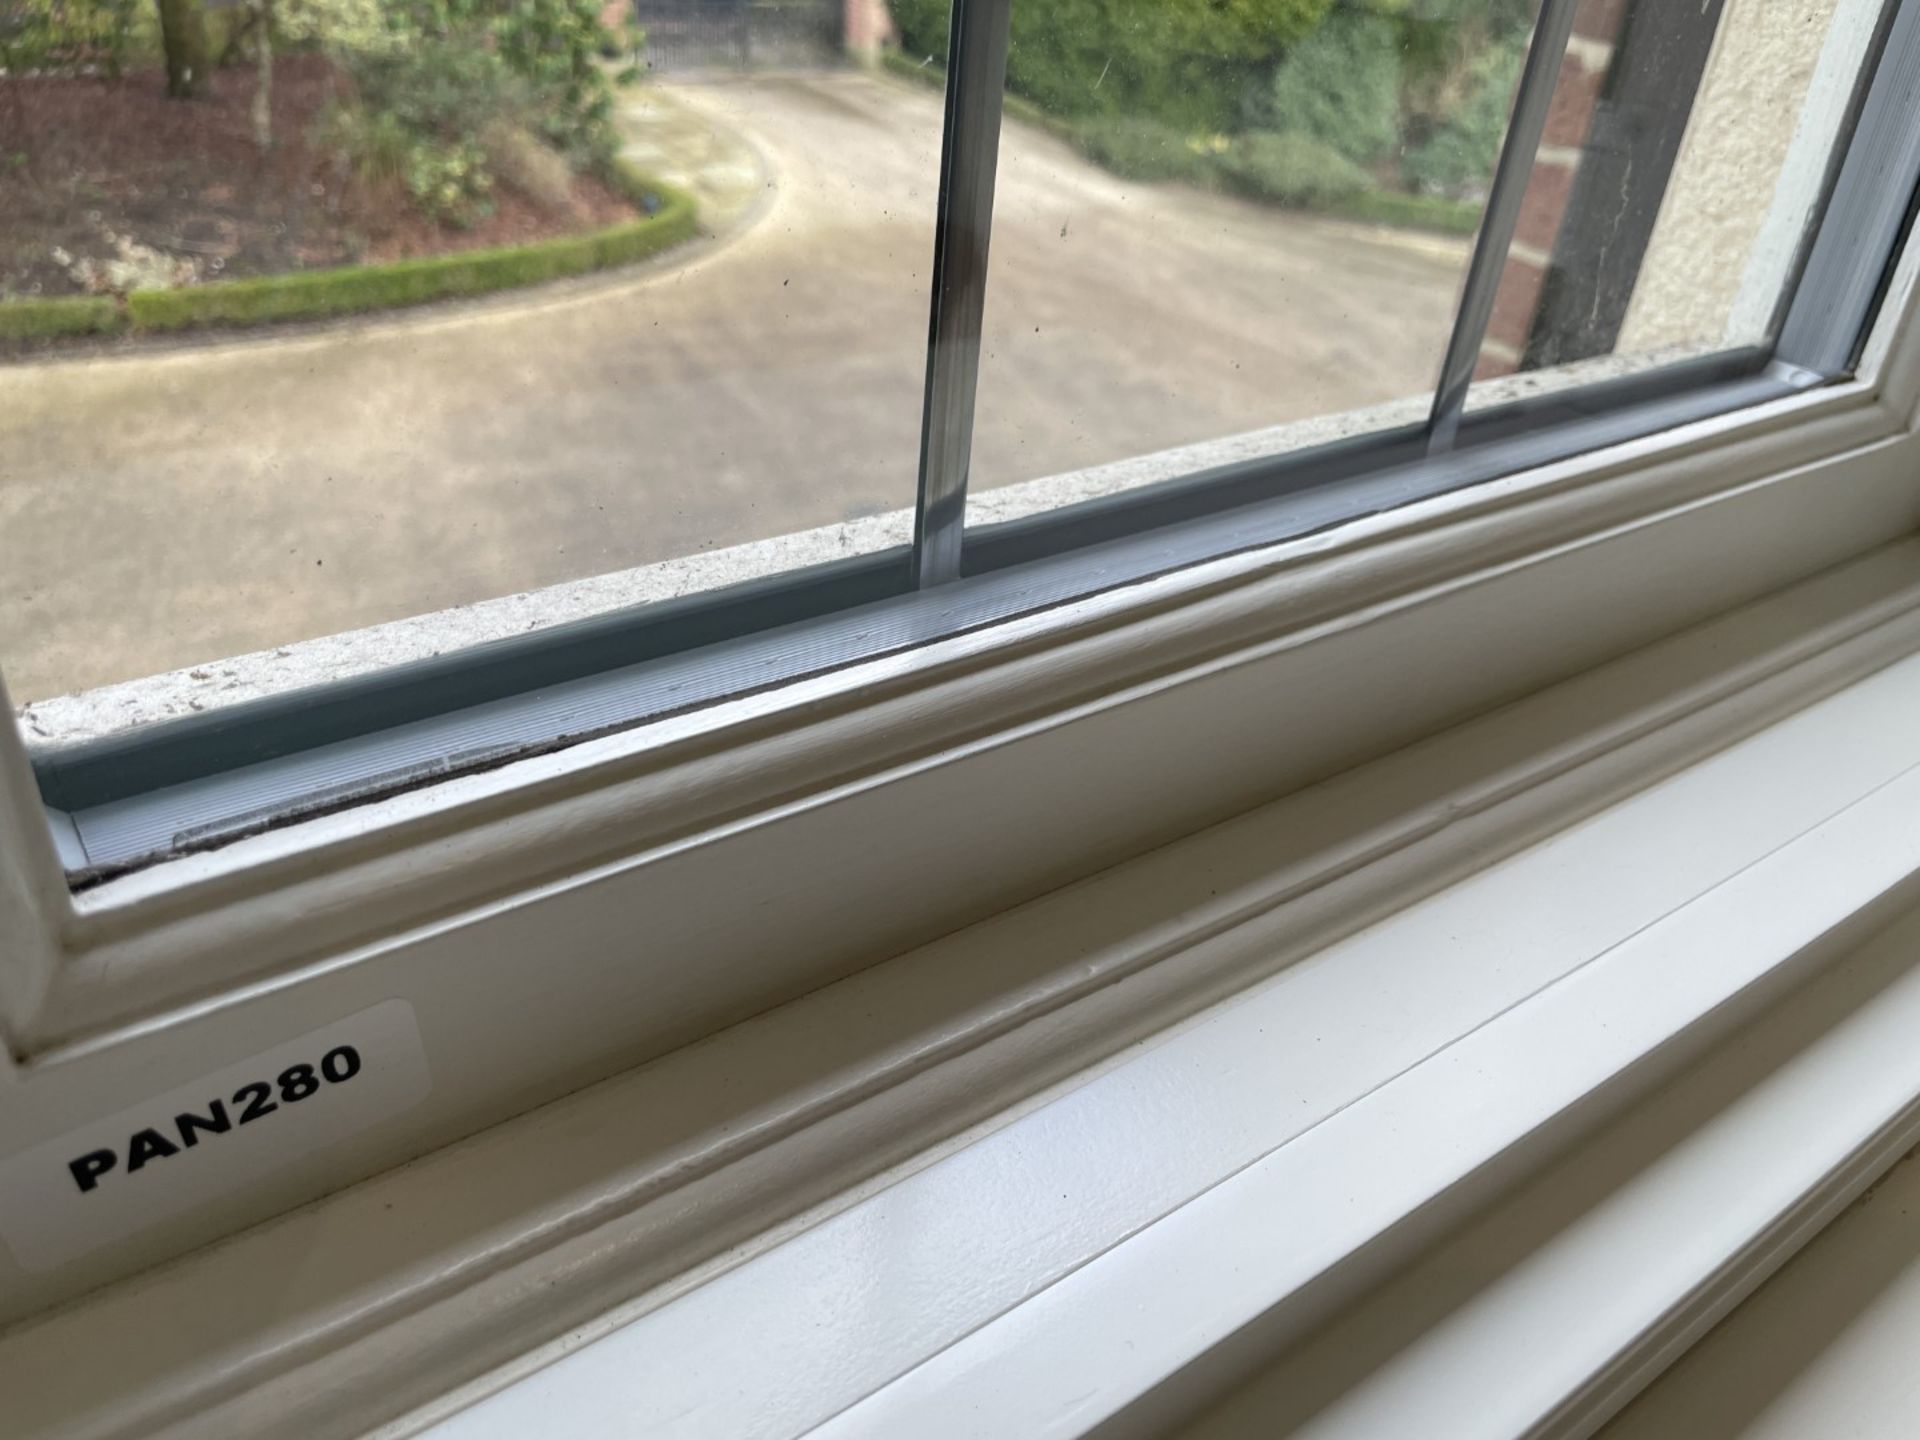 1 x Hardwood Timber Double Glazed Leaded 3-Pane Window Frame fitted with Shutter Blinds - Image 6 of 17